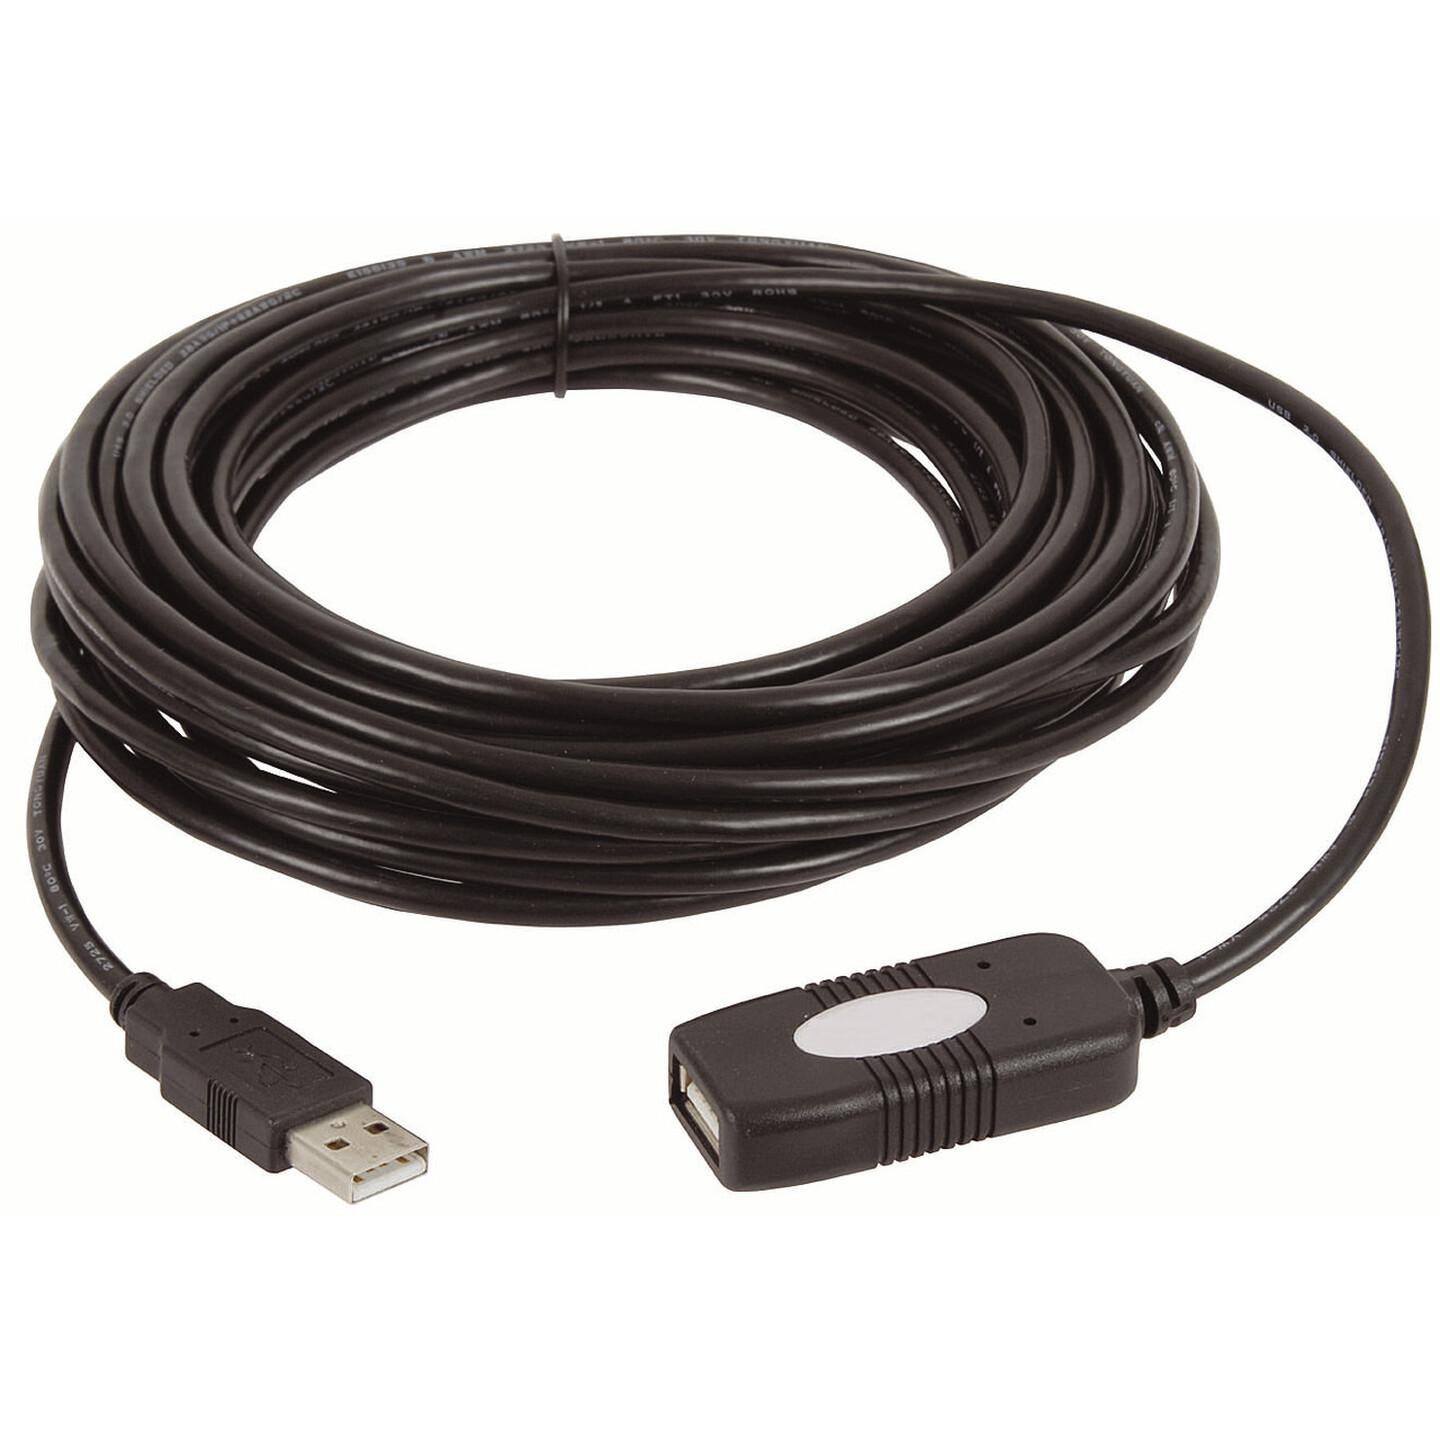 Powered USB 2.0 Extension Cable 10m